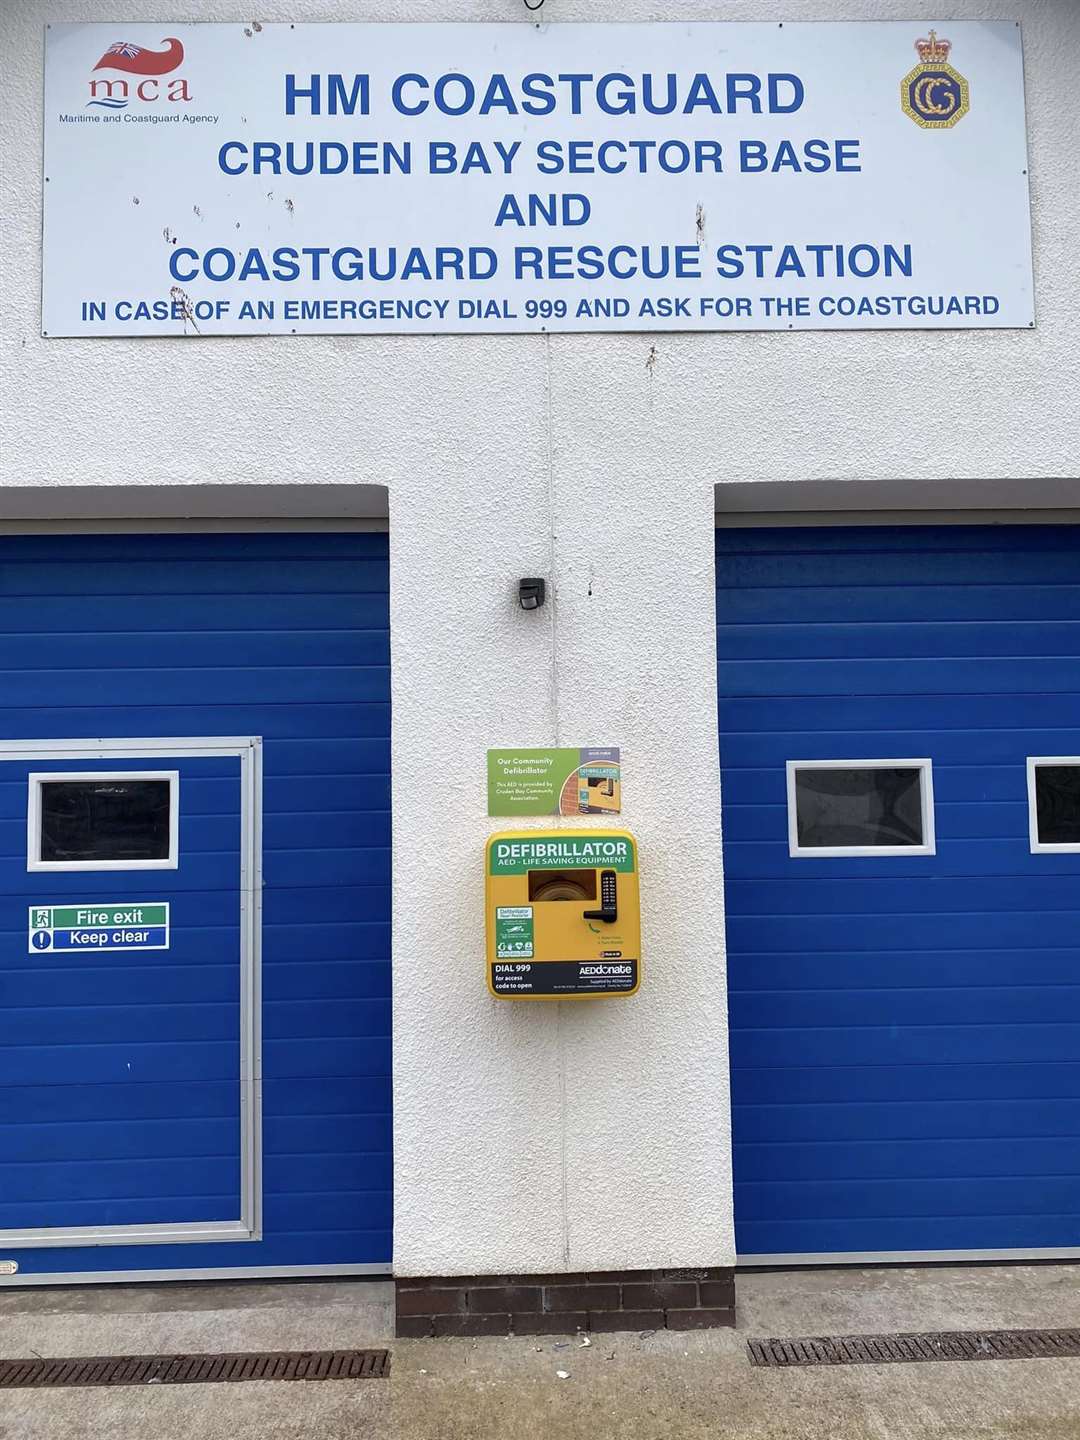 One unit is located at the Coastguard Station.